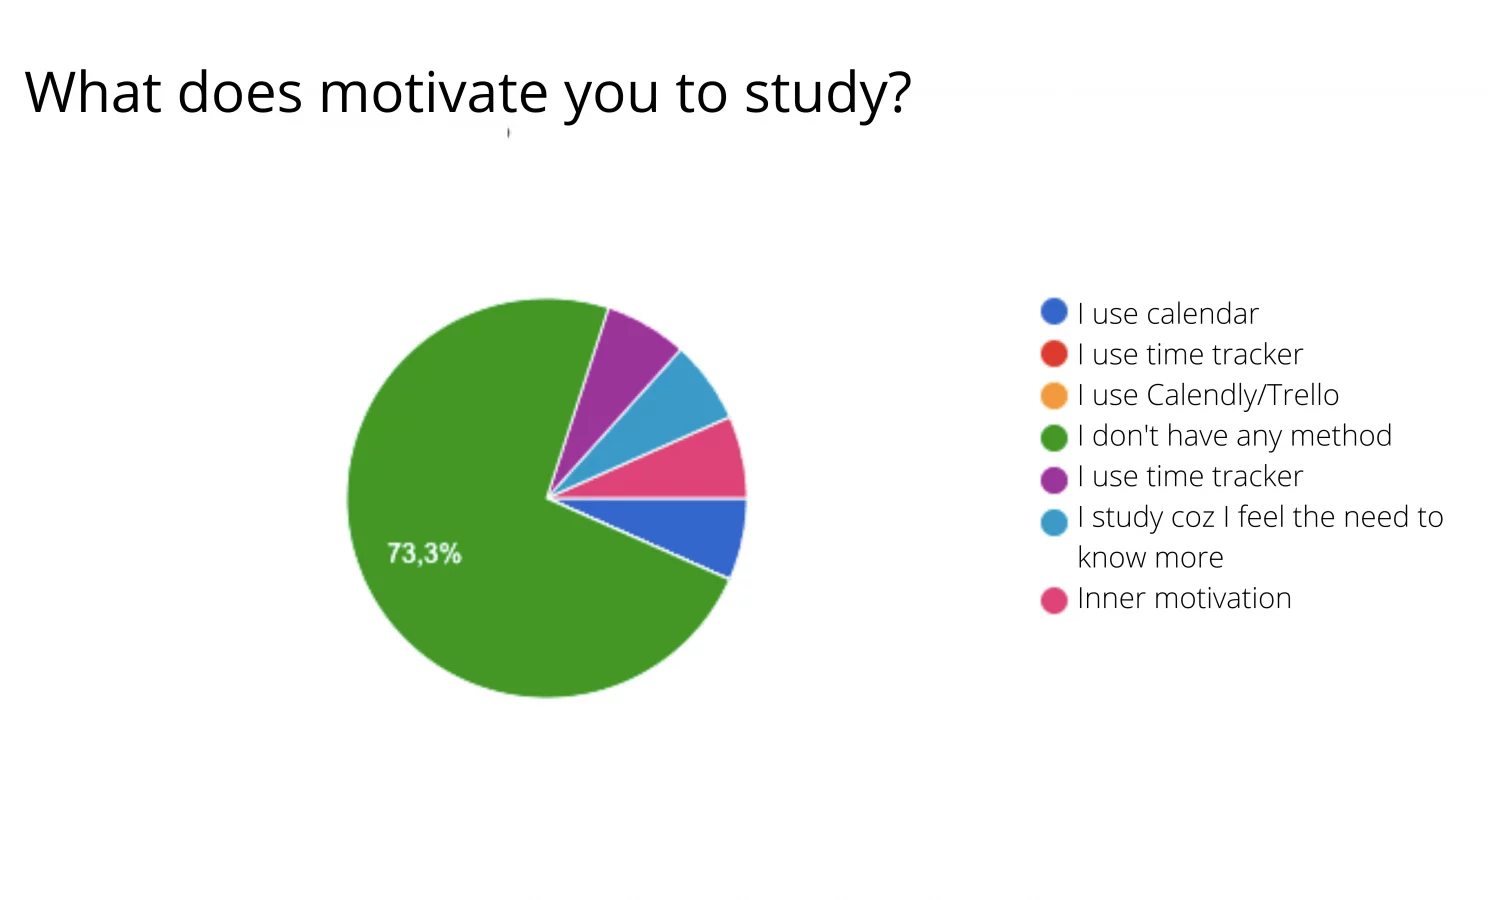 Data about motivation to study